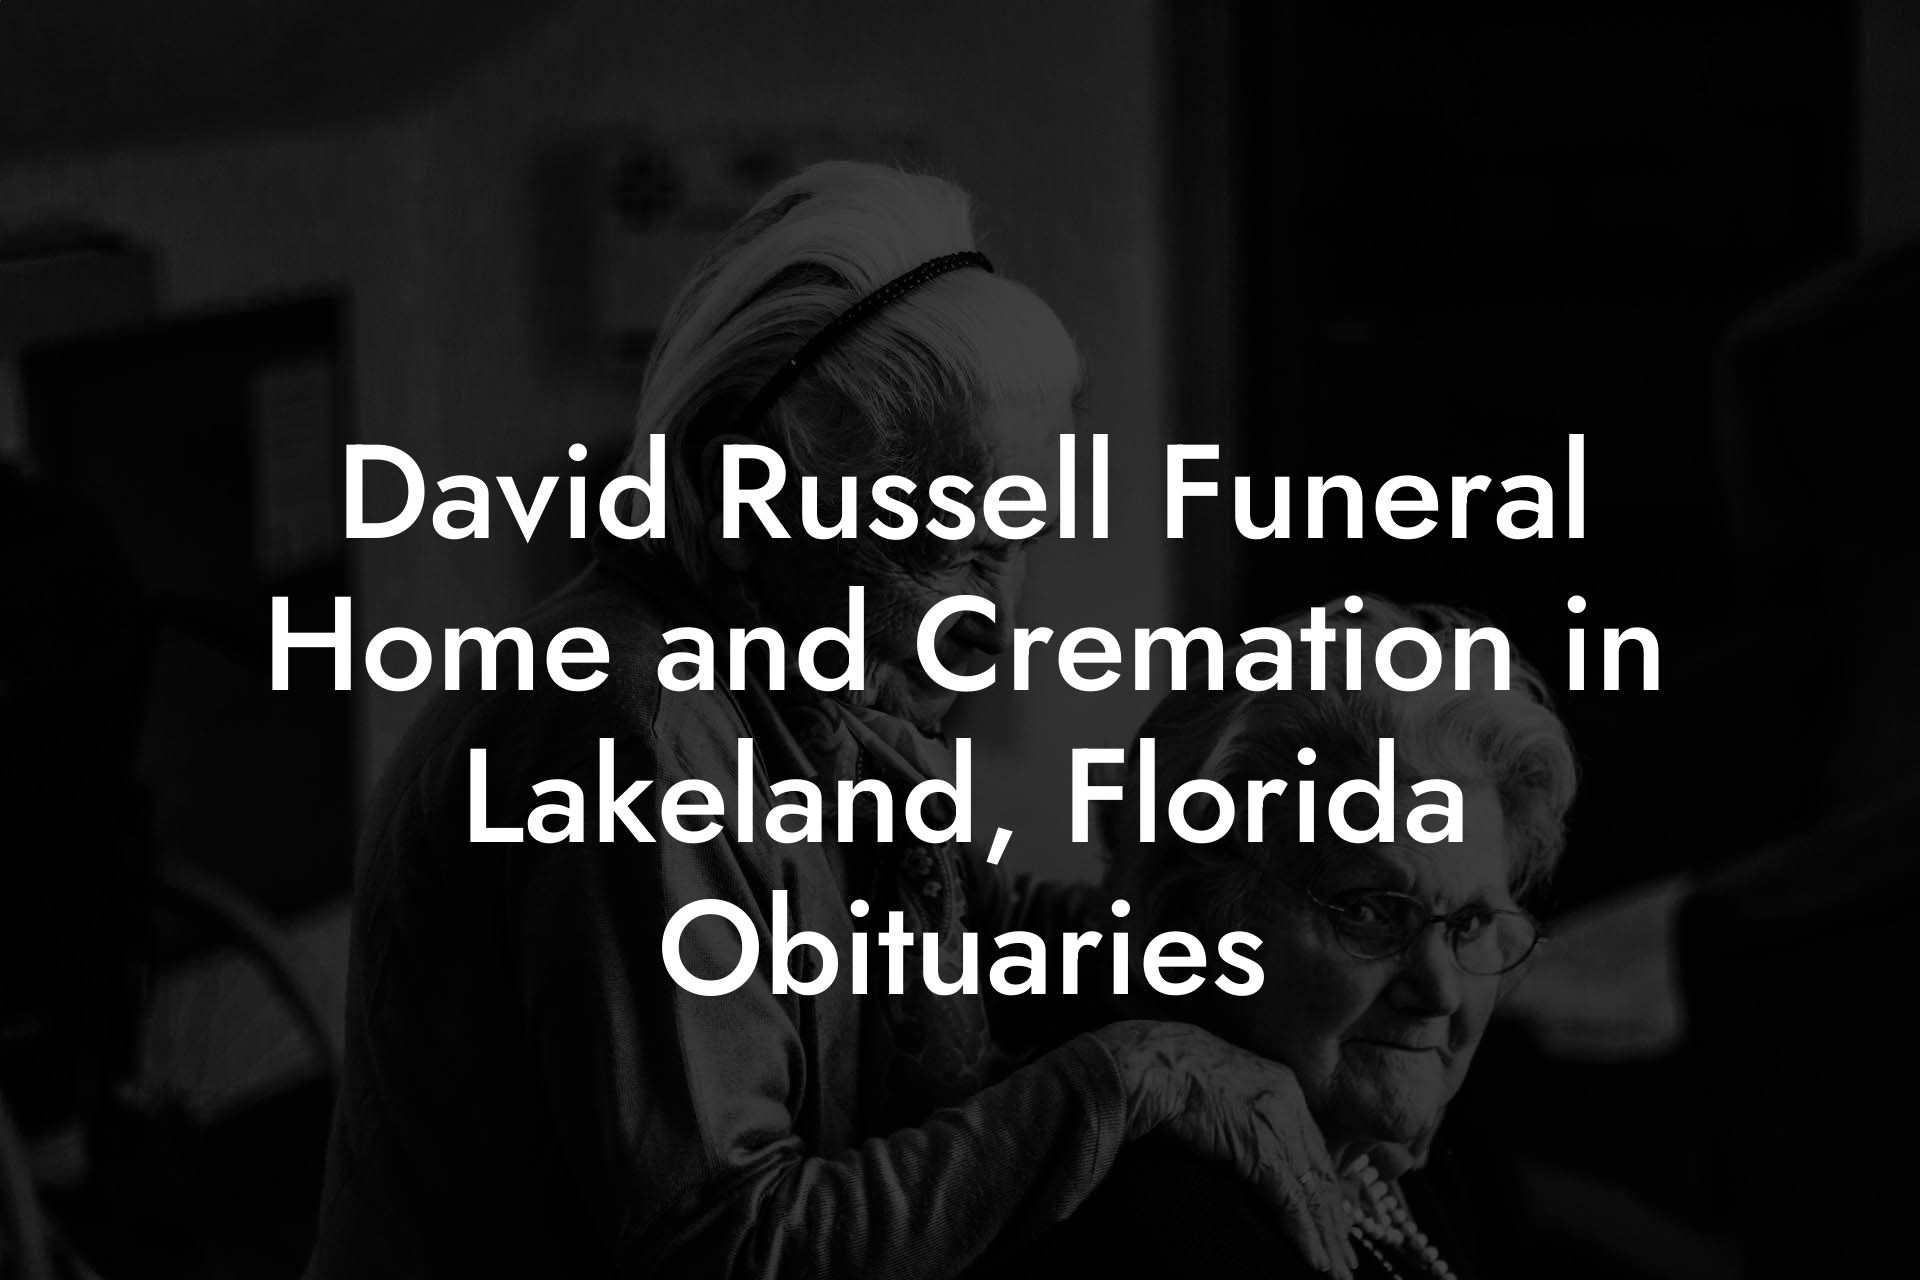 David Russell Funeral Home and Cremation in Lakeland, Florida Obituaries